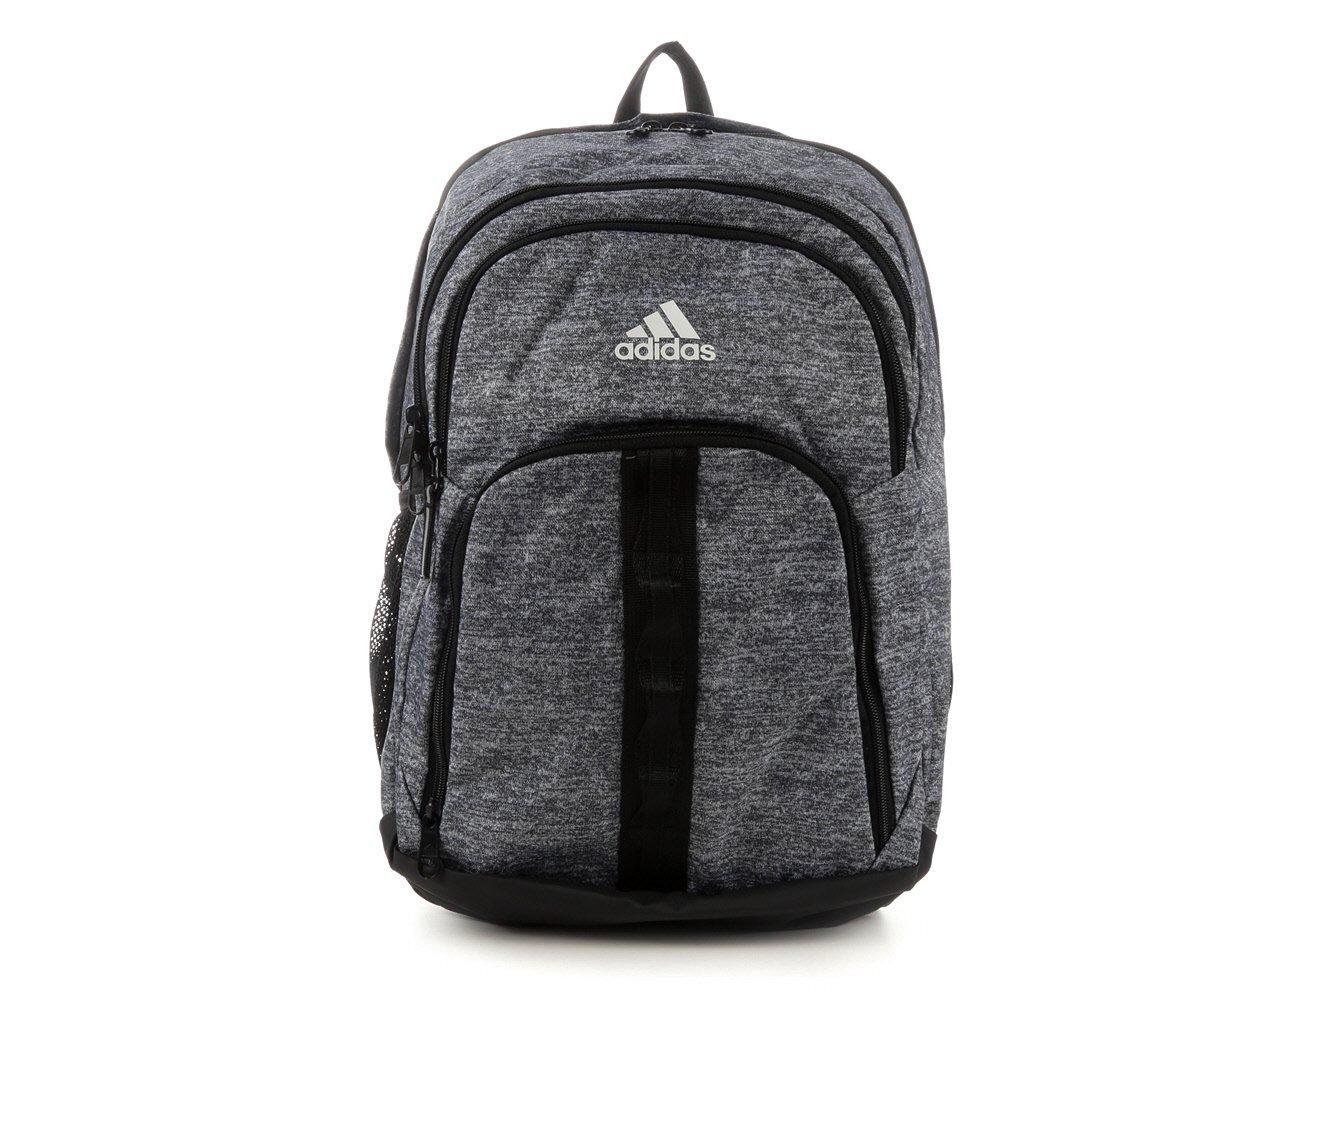 Adidas Prime VI Sustainable Backpack